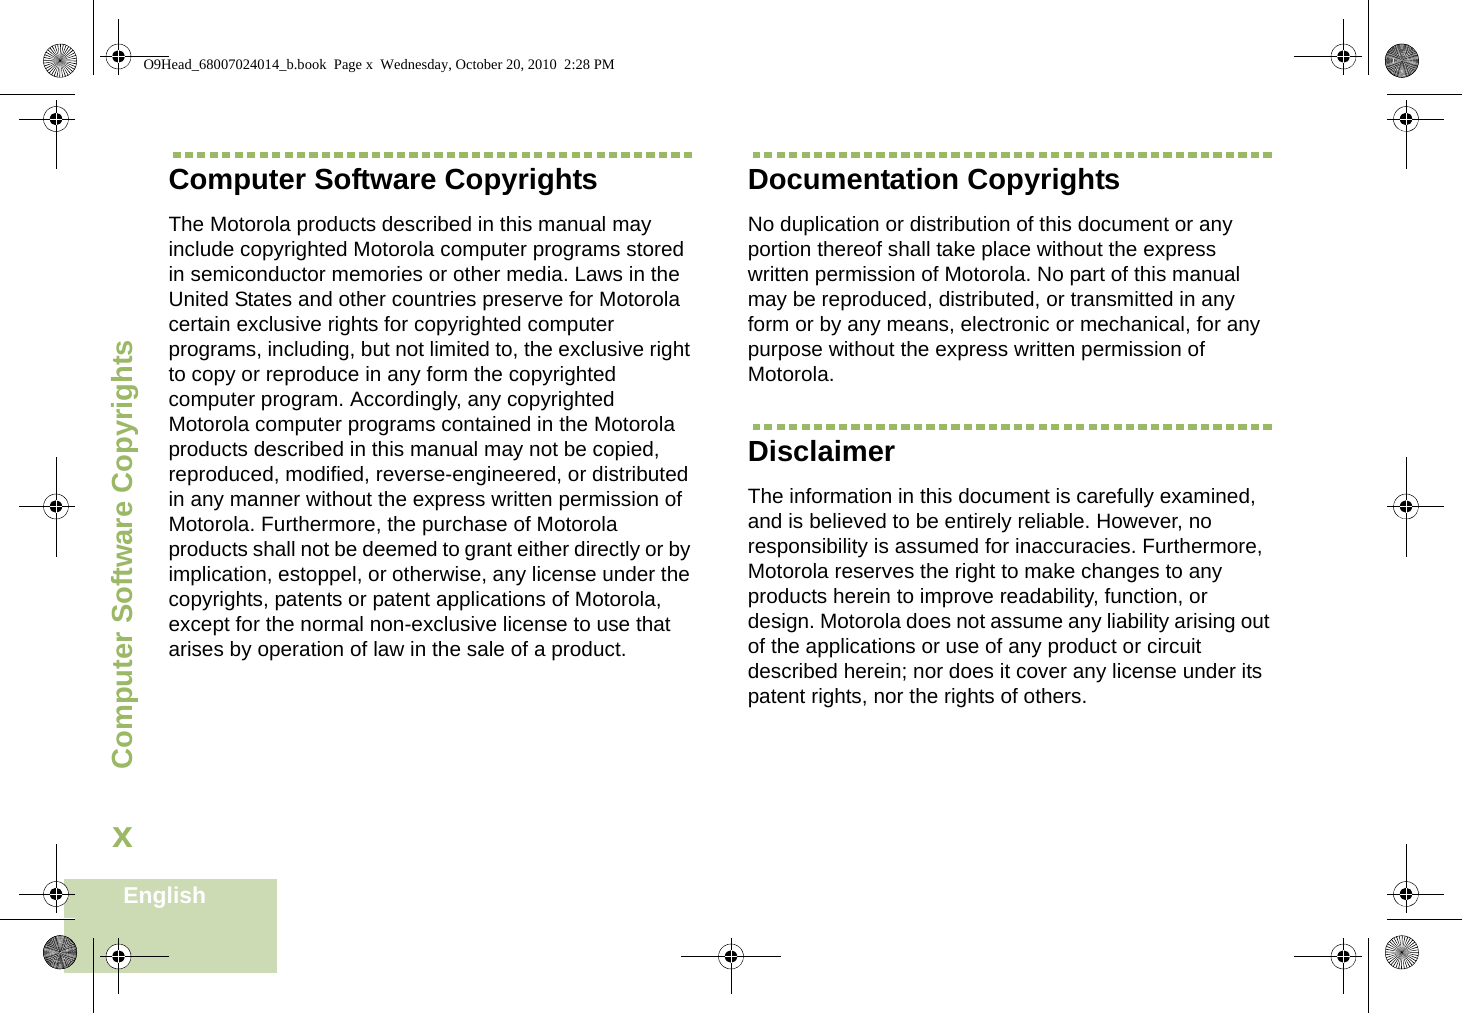 Computer Software CopyrightsEnglishxComputer Software CopyrightsThe Motorola products described in this manual may include copyrighted Motorola computer programs stored in semiconductor memories or other media. Laws in the United States and other countries preserve for Motorola certain exclusive rights for copyrighted computer programs, including, but not limited to, the exclusive right to copy or reproduce in any form the copyrighted computer program. Accordingly, any copyrighted Motorola computer programs contained in the Motorola products described in this manual may not be copied, reproduced, modified, reverse-engineered, or distributed in any manner without the express written permission of Motorola. Furthermore, the purchase of Motorola products shall not be deemed to grant either directly or by implication, estoppel, or otherwise, any license under the copyrights, patents or patent applications of Motorola, except for the normal non-exclusive license to use that arises by operation of law in the sale of a product.Documentation CopyrightsNo duplication or distribution of this document or any portion thereof shall take place without the express written permission of Motorola. No part of this manual may be reproduced, distributed, or transmitted in any form or by any means, electronic or mechanical, for any purpose without the express written permission of Motorola.DisclaimerThe information in this document is carefully examined, and is believed to be entirely reliable. However, no responsibility is assumed for inaccuracies. Furthermore, Motorola reserves the right to make changes to any products herein to improve readability, function, or design. Motorola does not assume any liability arising out of the applications or use of any product or circuit described herein; nor does it cover any license under its patent rights, nor the rights of others. O9Head_68007024014_b.book  Page x  Wednesday, October 20, 2010  2:28 PM